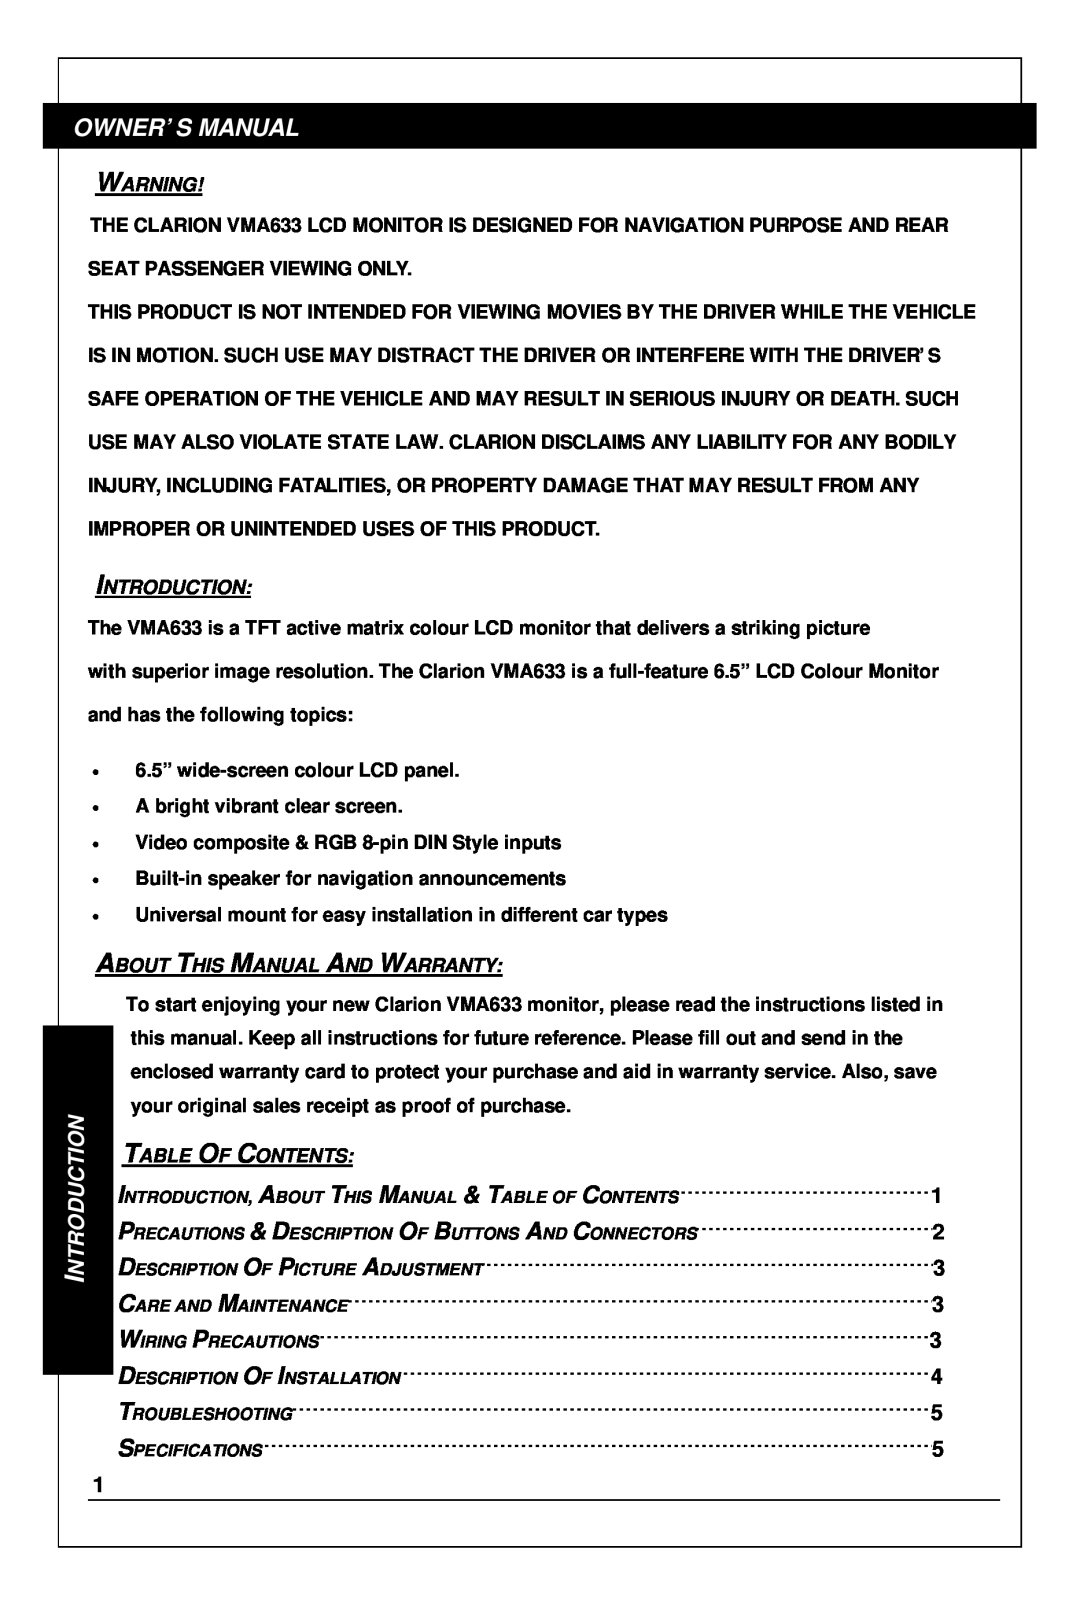 Clarion VMA633 owner manual Owner’S Manual, Introduction, About This Manual And Warranty, Table Of Contents 